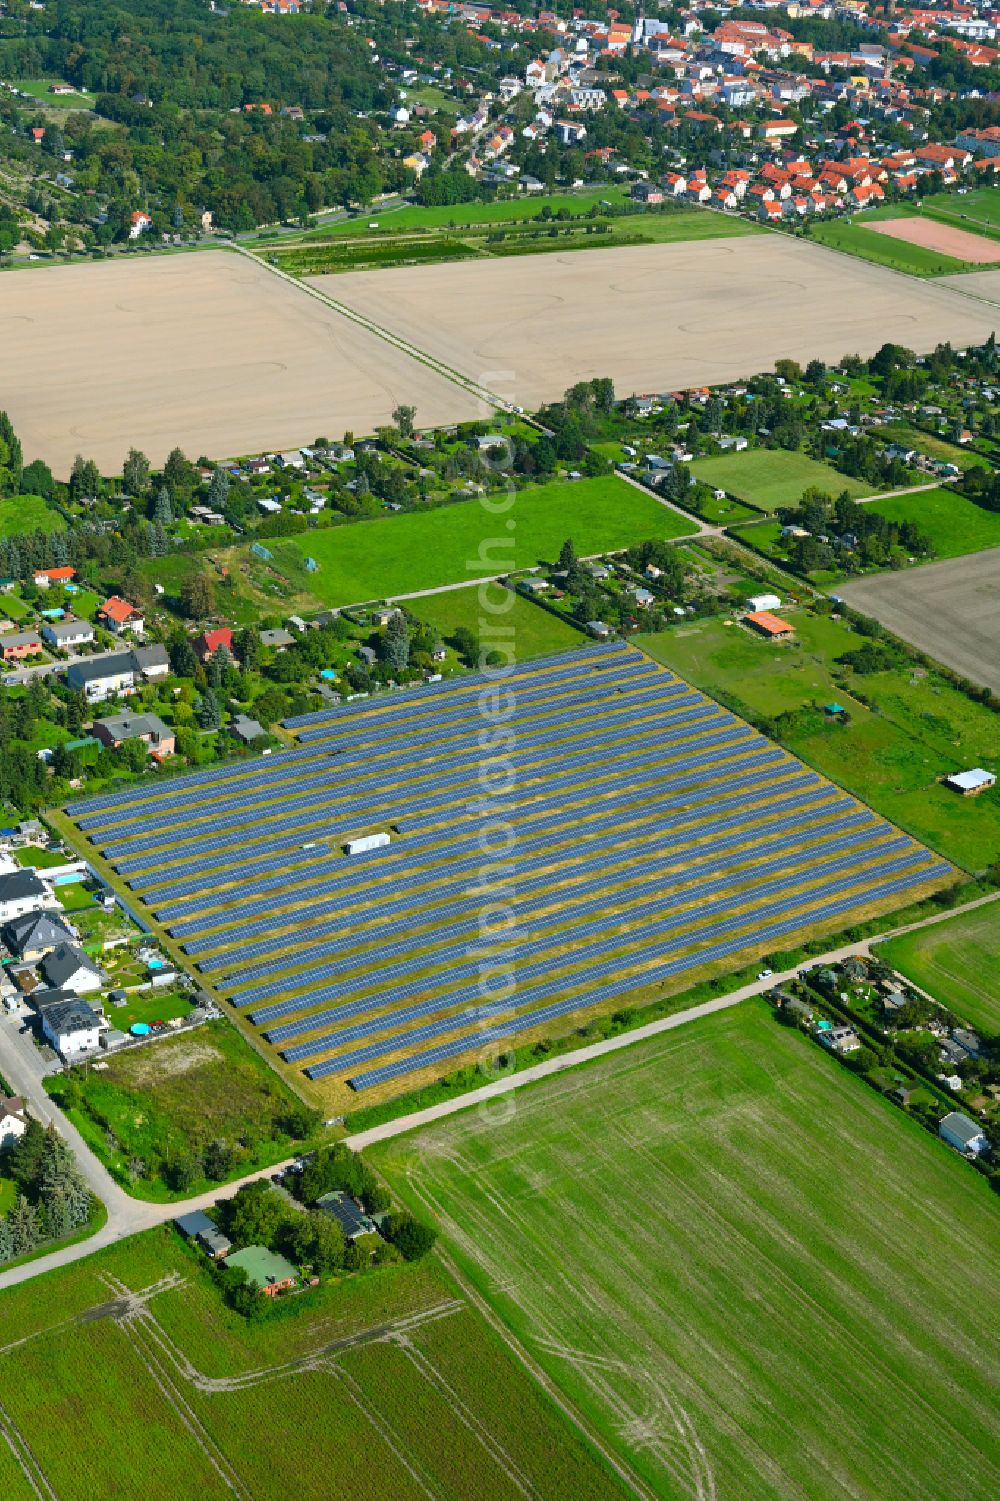 Quesitz from above - Rows of panels of a solar power plant and photovoltaic system on a field in Quesitz in the state Saxony, Germany